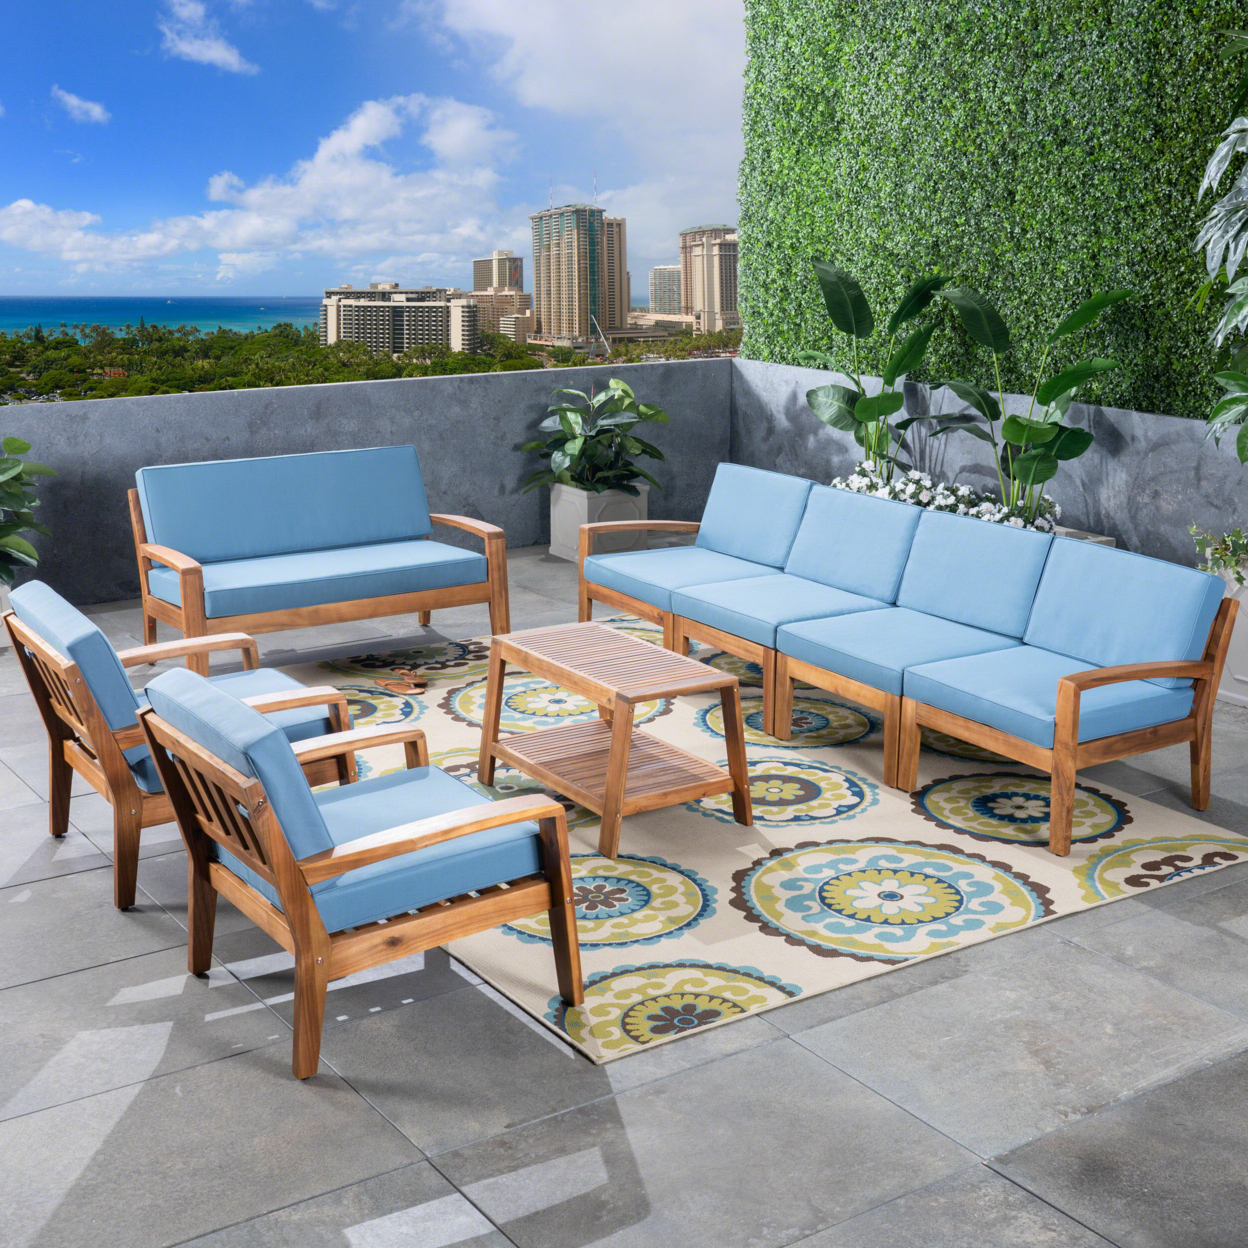 Amaryllis Outdoor Acacia Wood 8 Seater Sectional Chat Set With Coffee Table - Teak / Blue